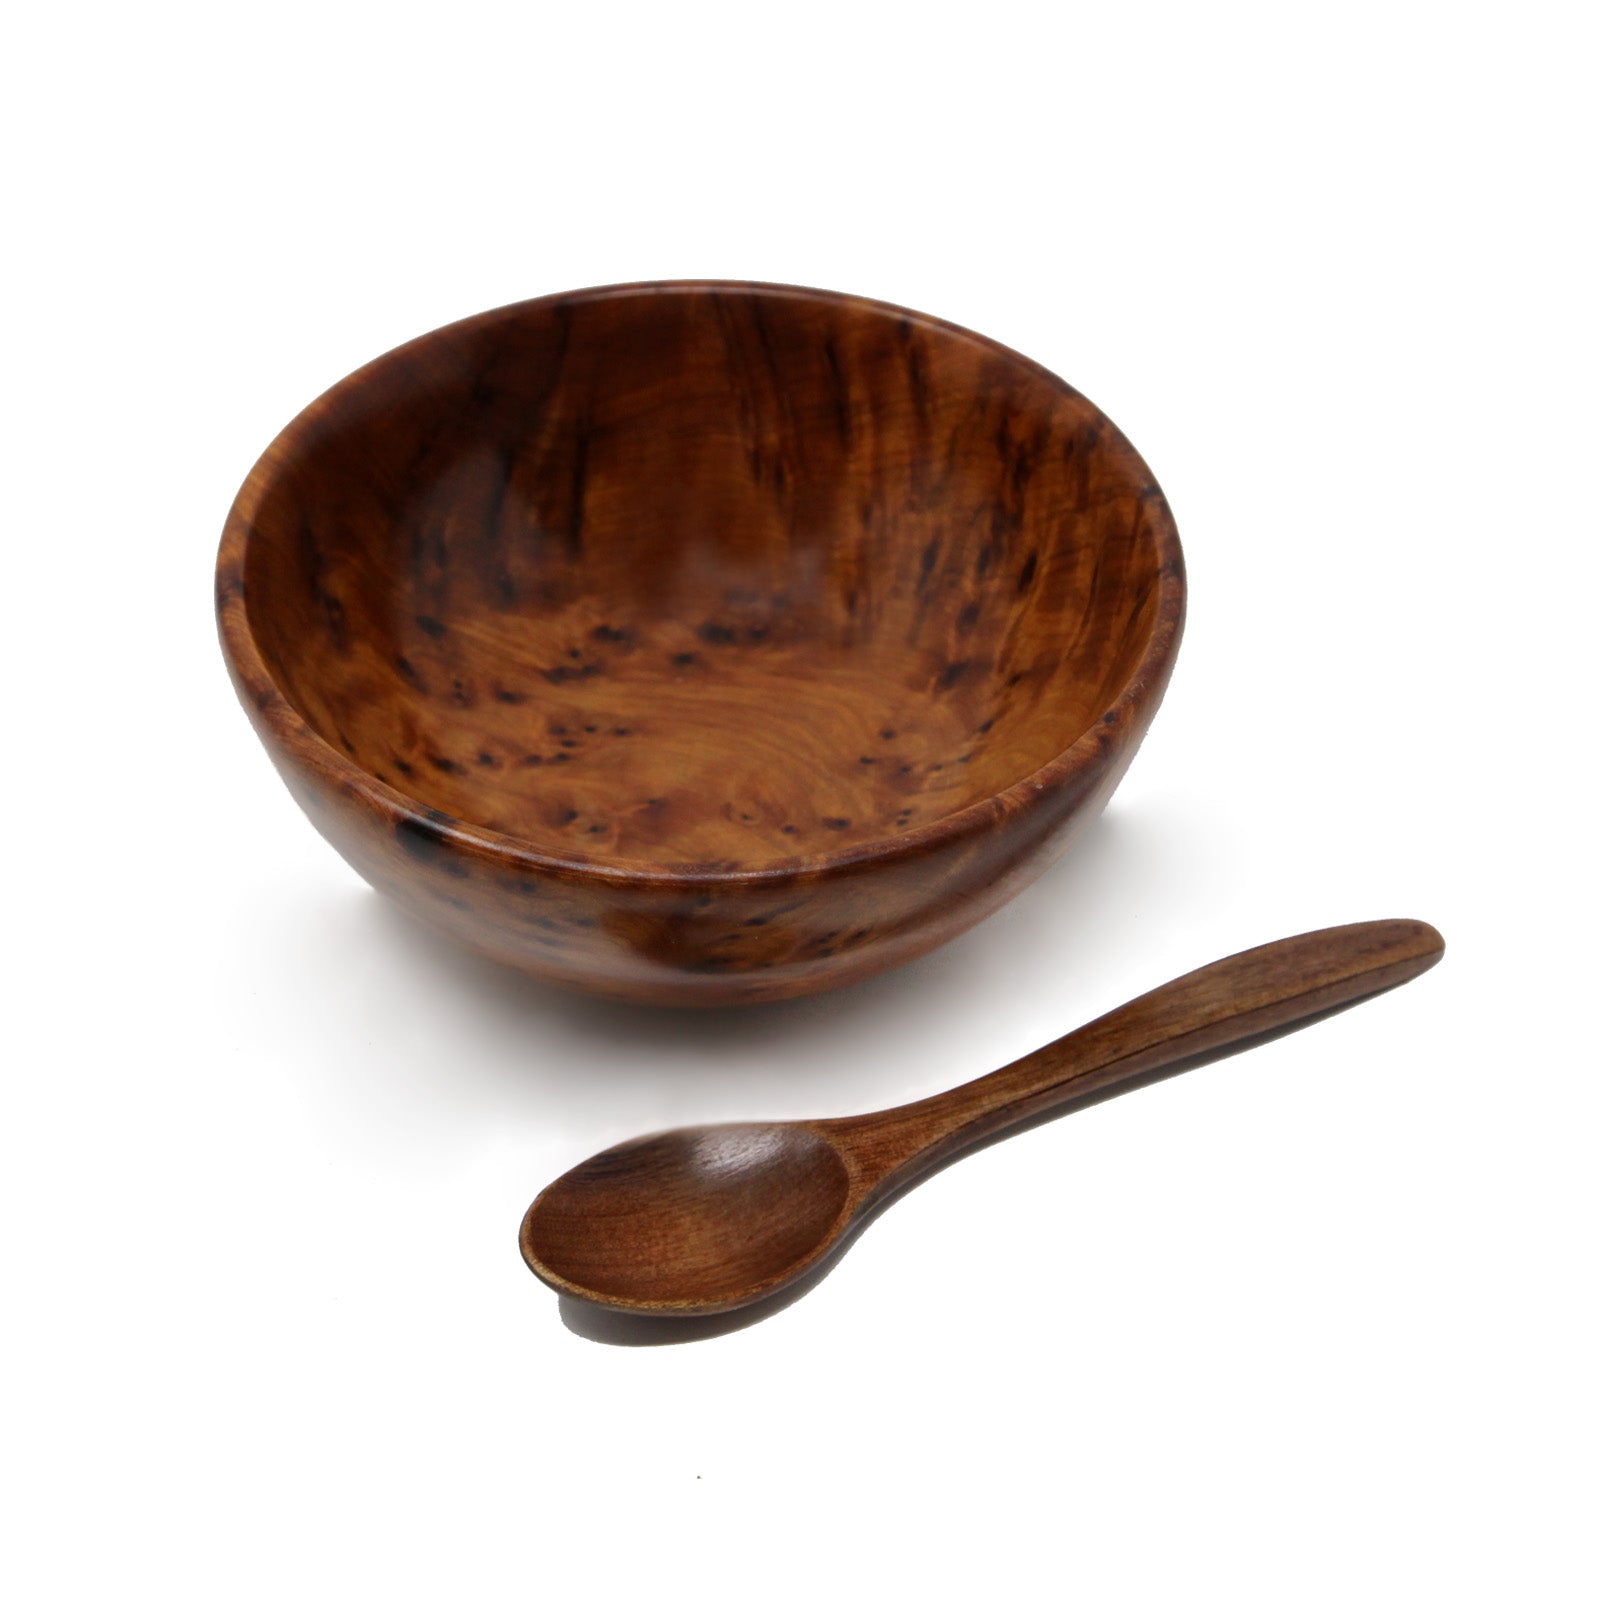 Handmade Wooden Hair Mask Bowl and Spoon